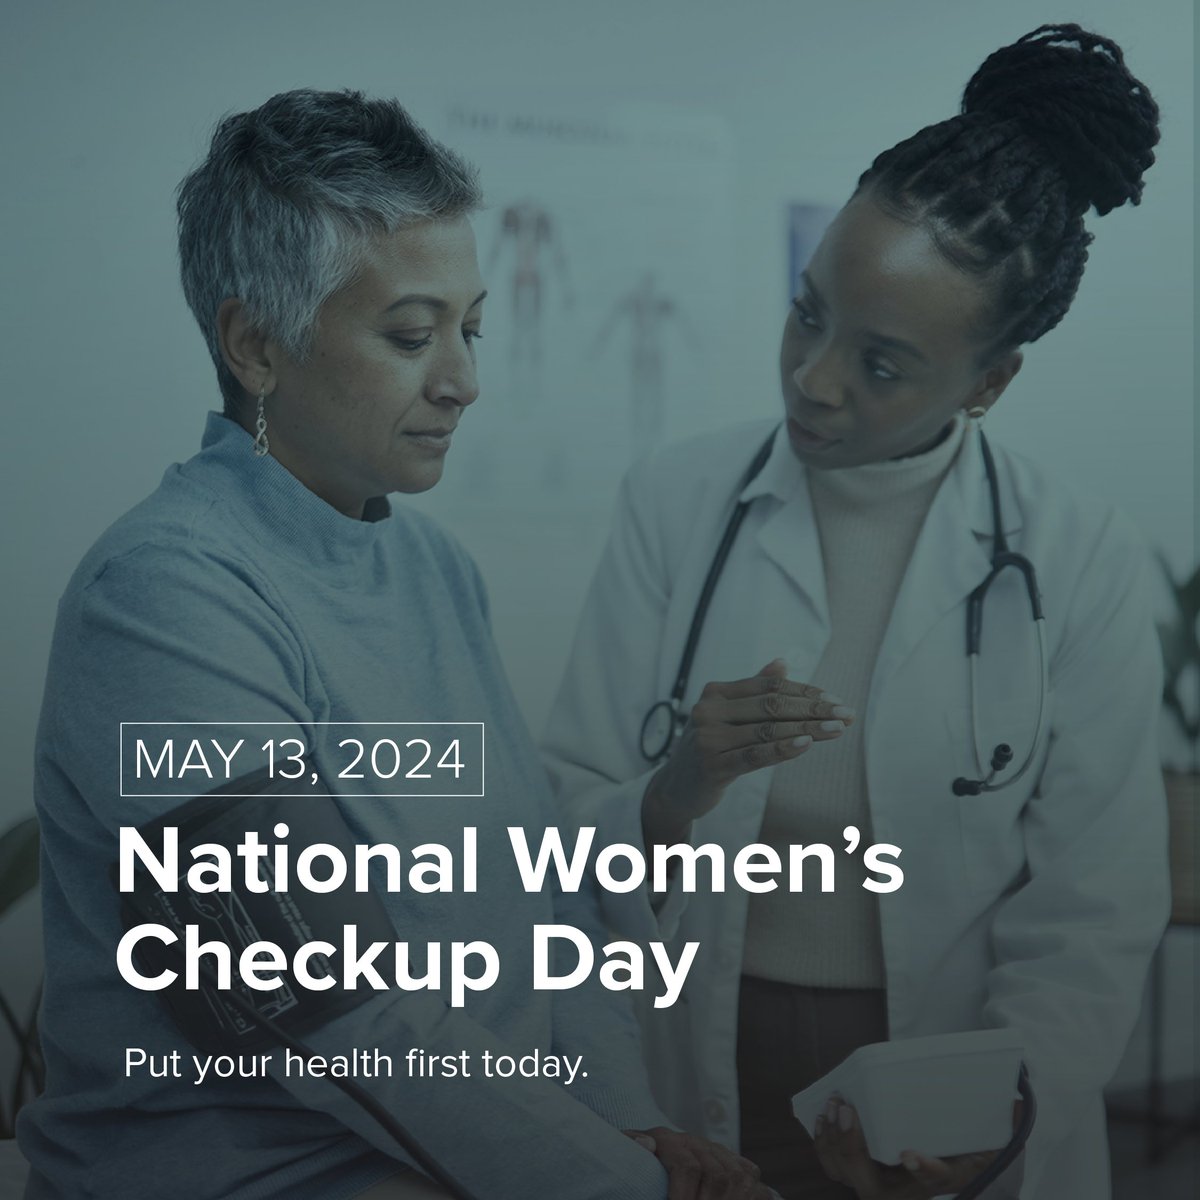 Today is National Women's Checkup Day, a reminder to take care of ourselves and our health by scheduling appointments with our healthcare providers. We want to use this day to remind our Blessties that we have resources for any questions that might come up.